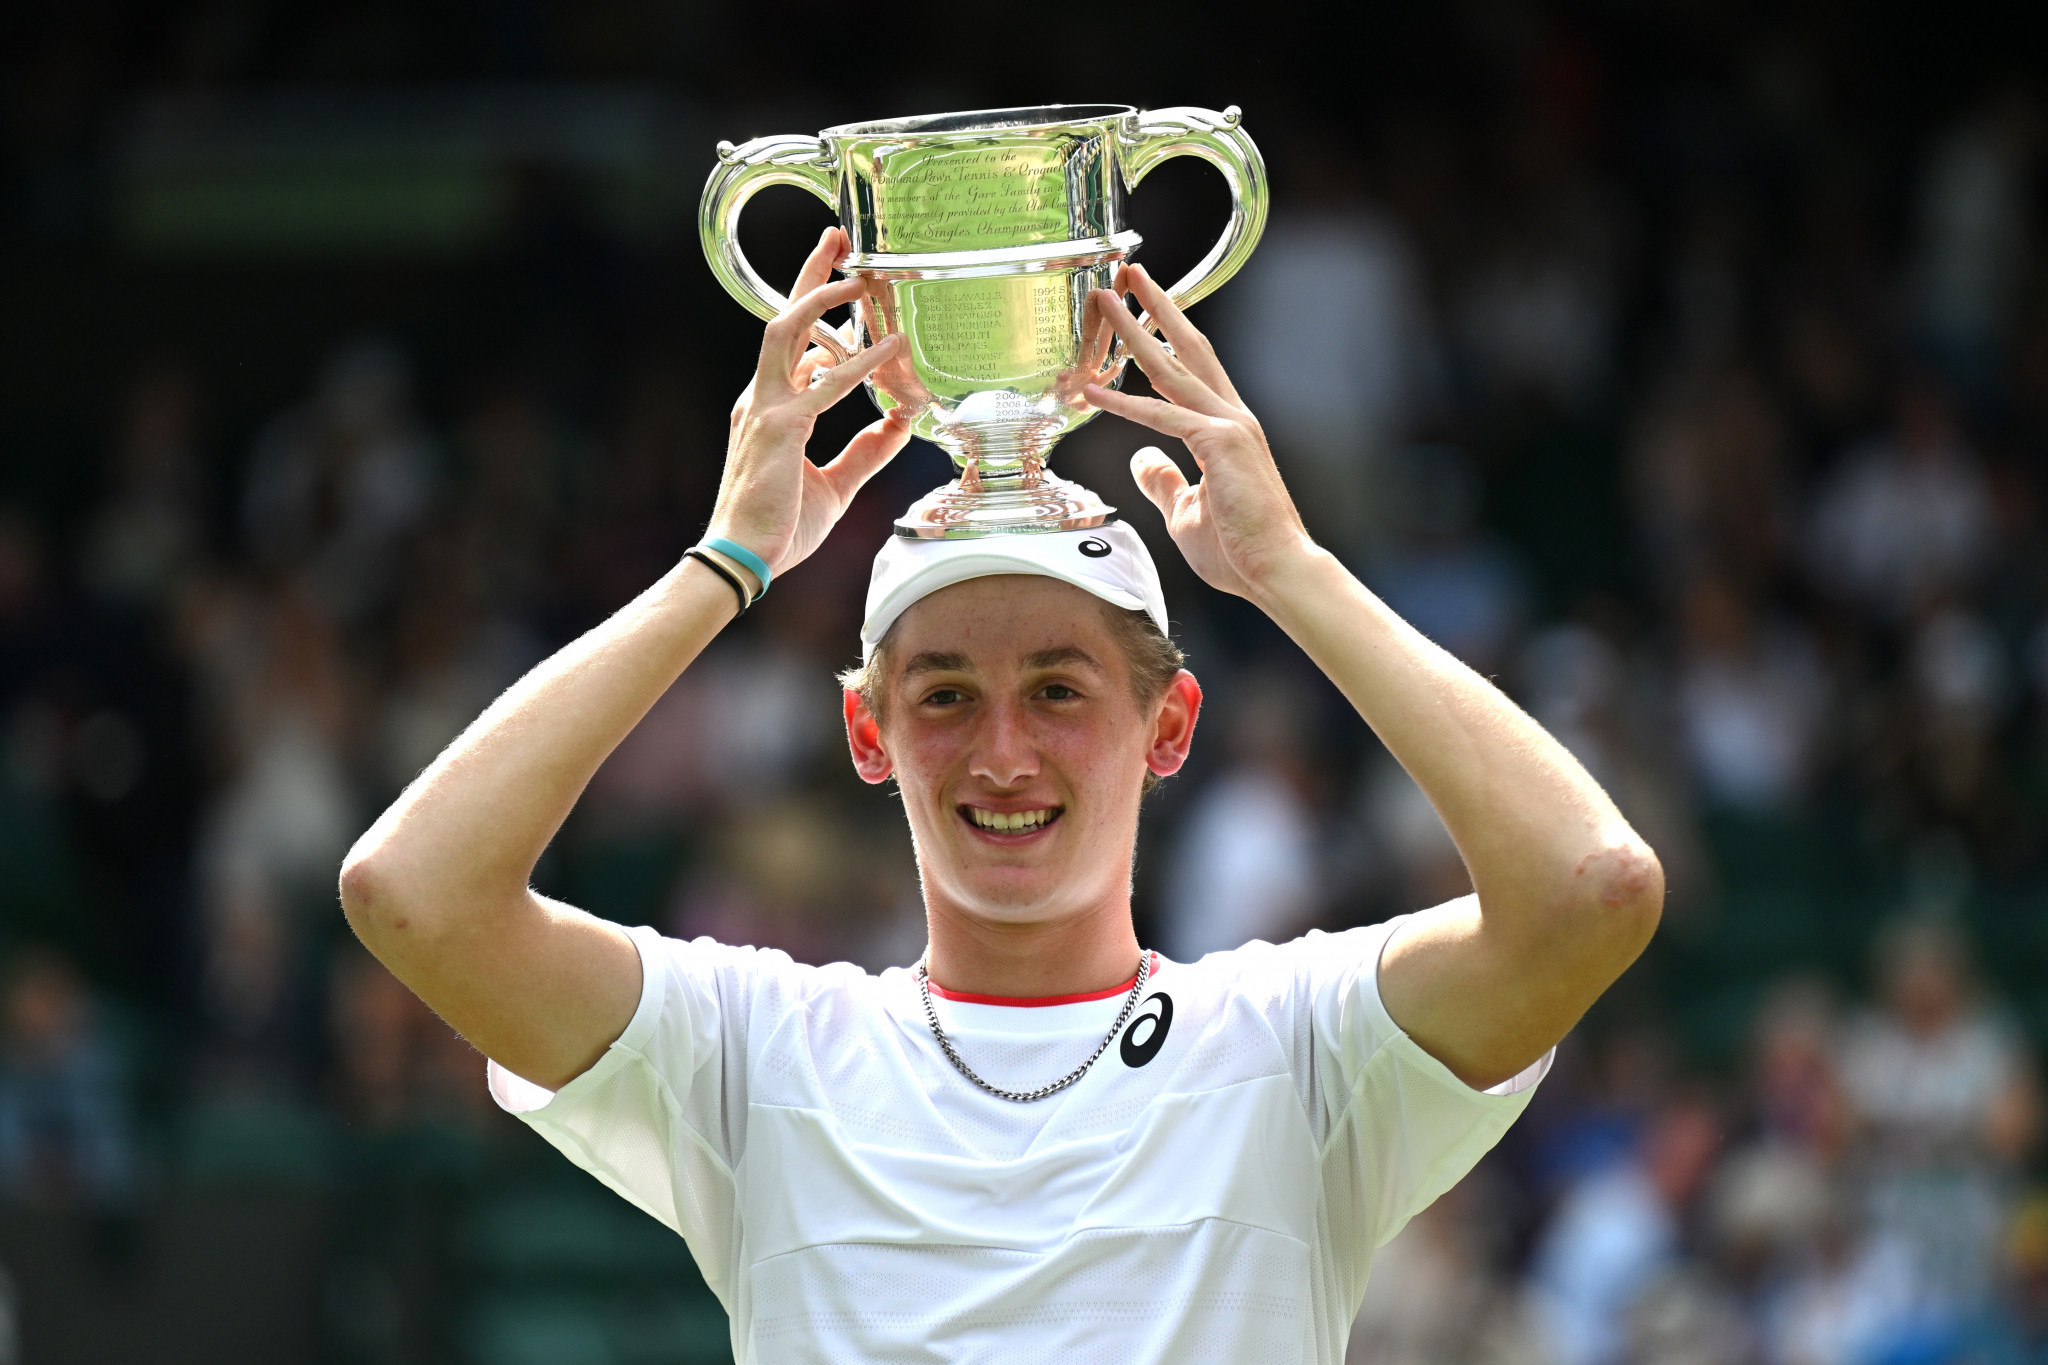 Henry Searle ended Britain's 61-year wait for a boys' singles champion at Wimbledon ©Getty Images